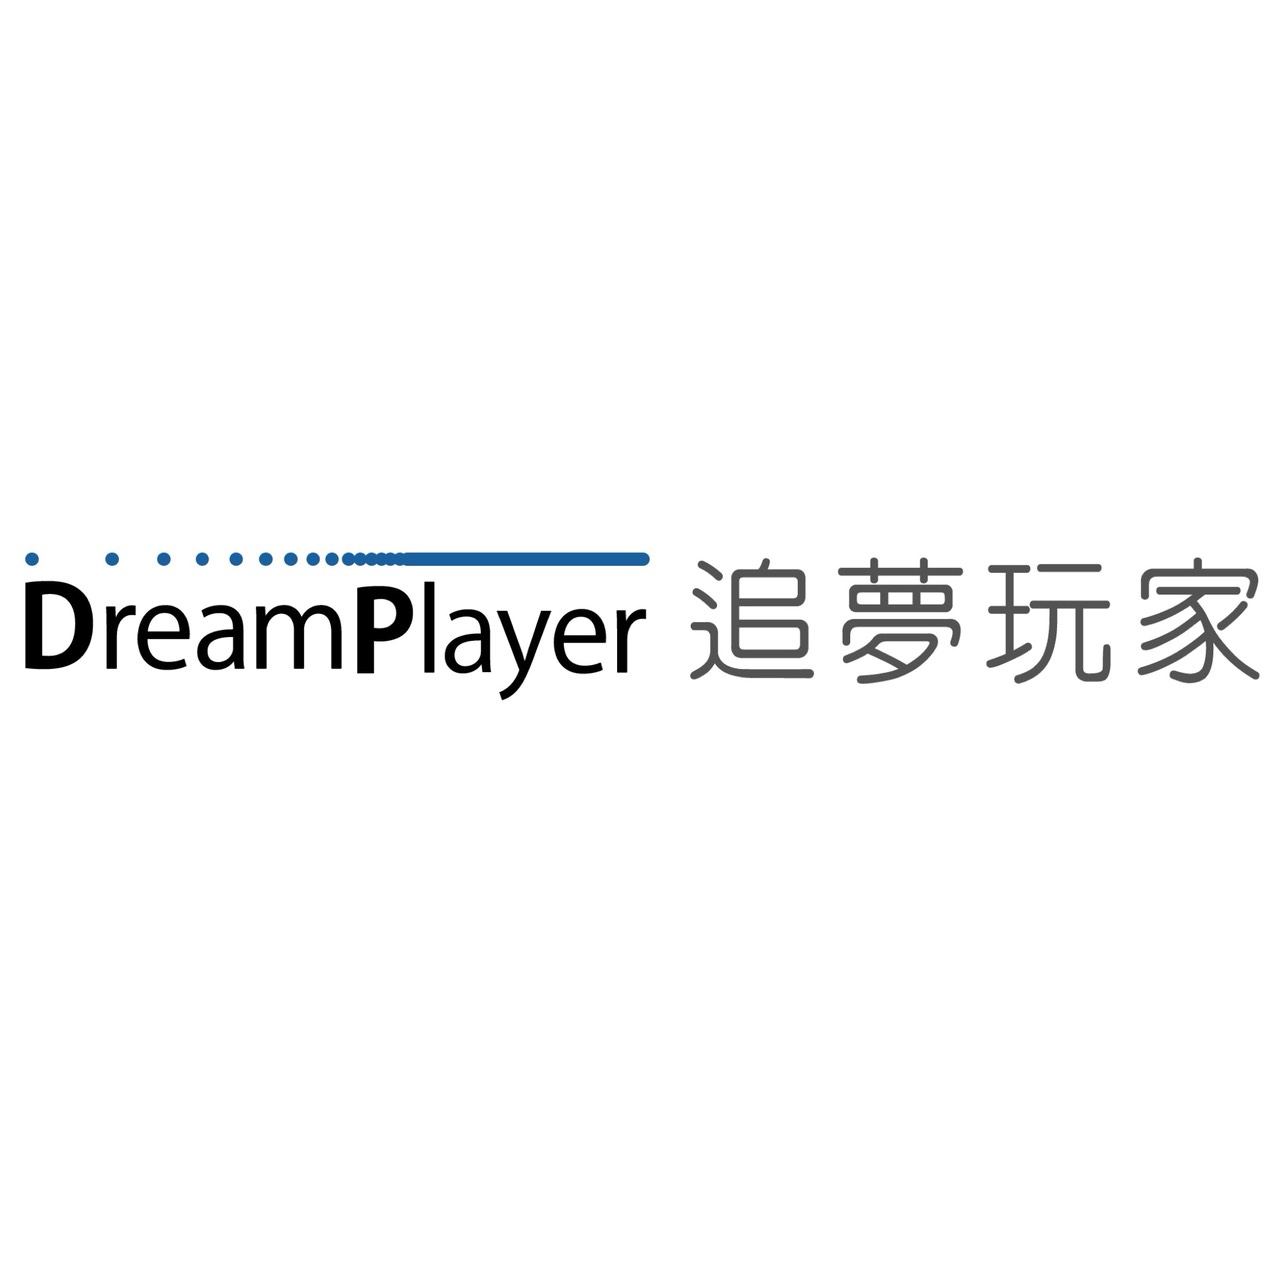 DreamPlayer官方